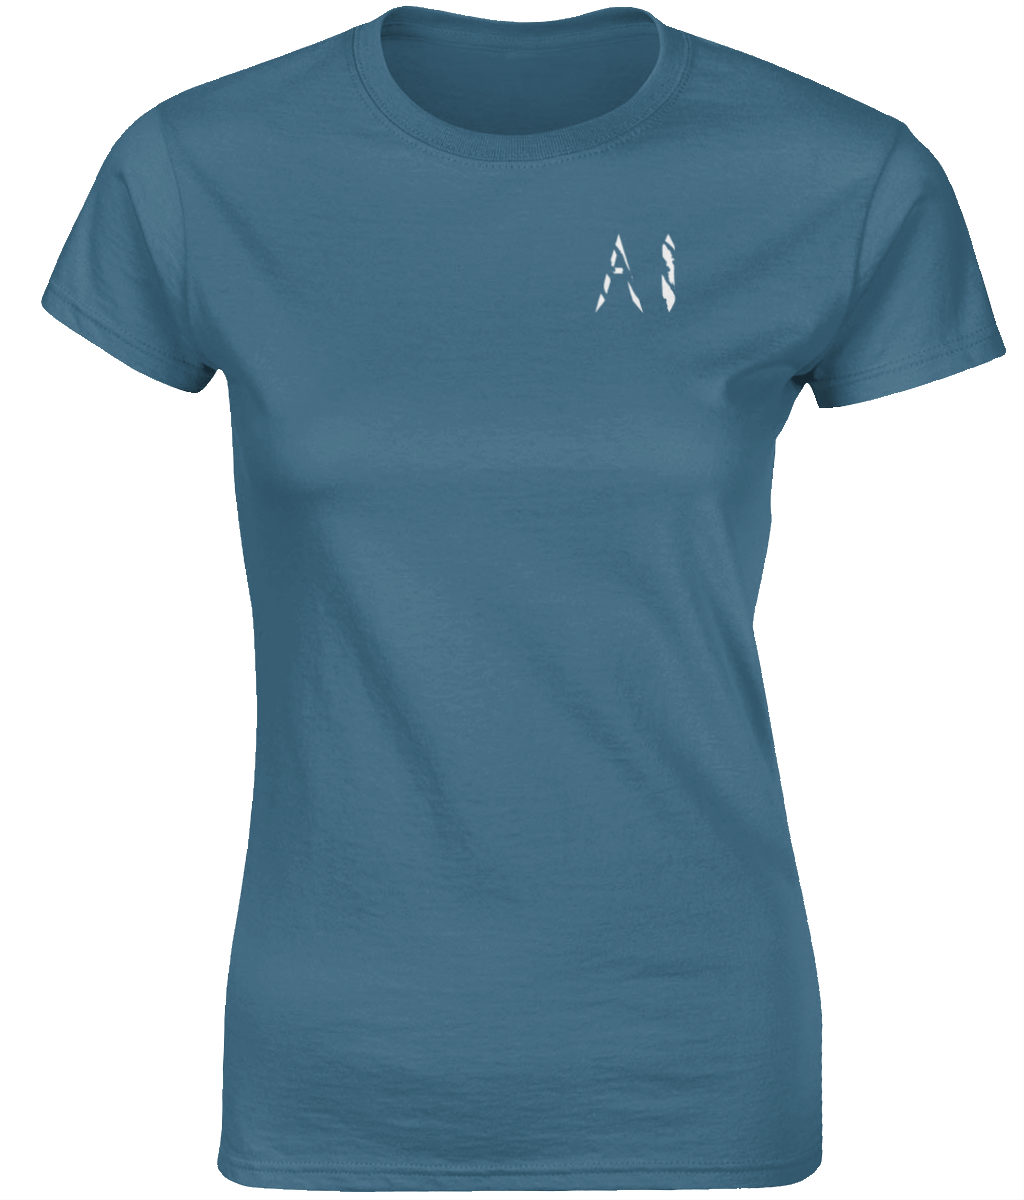 Womens platinum Fitted Ringspun T-Shirt with White AI logo on left breast